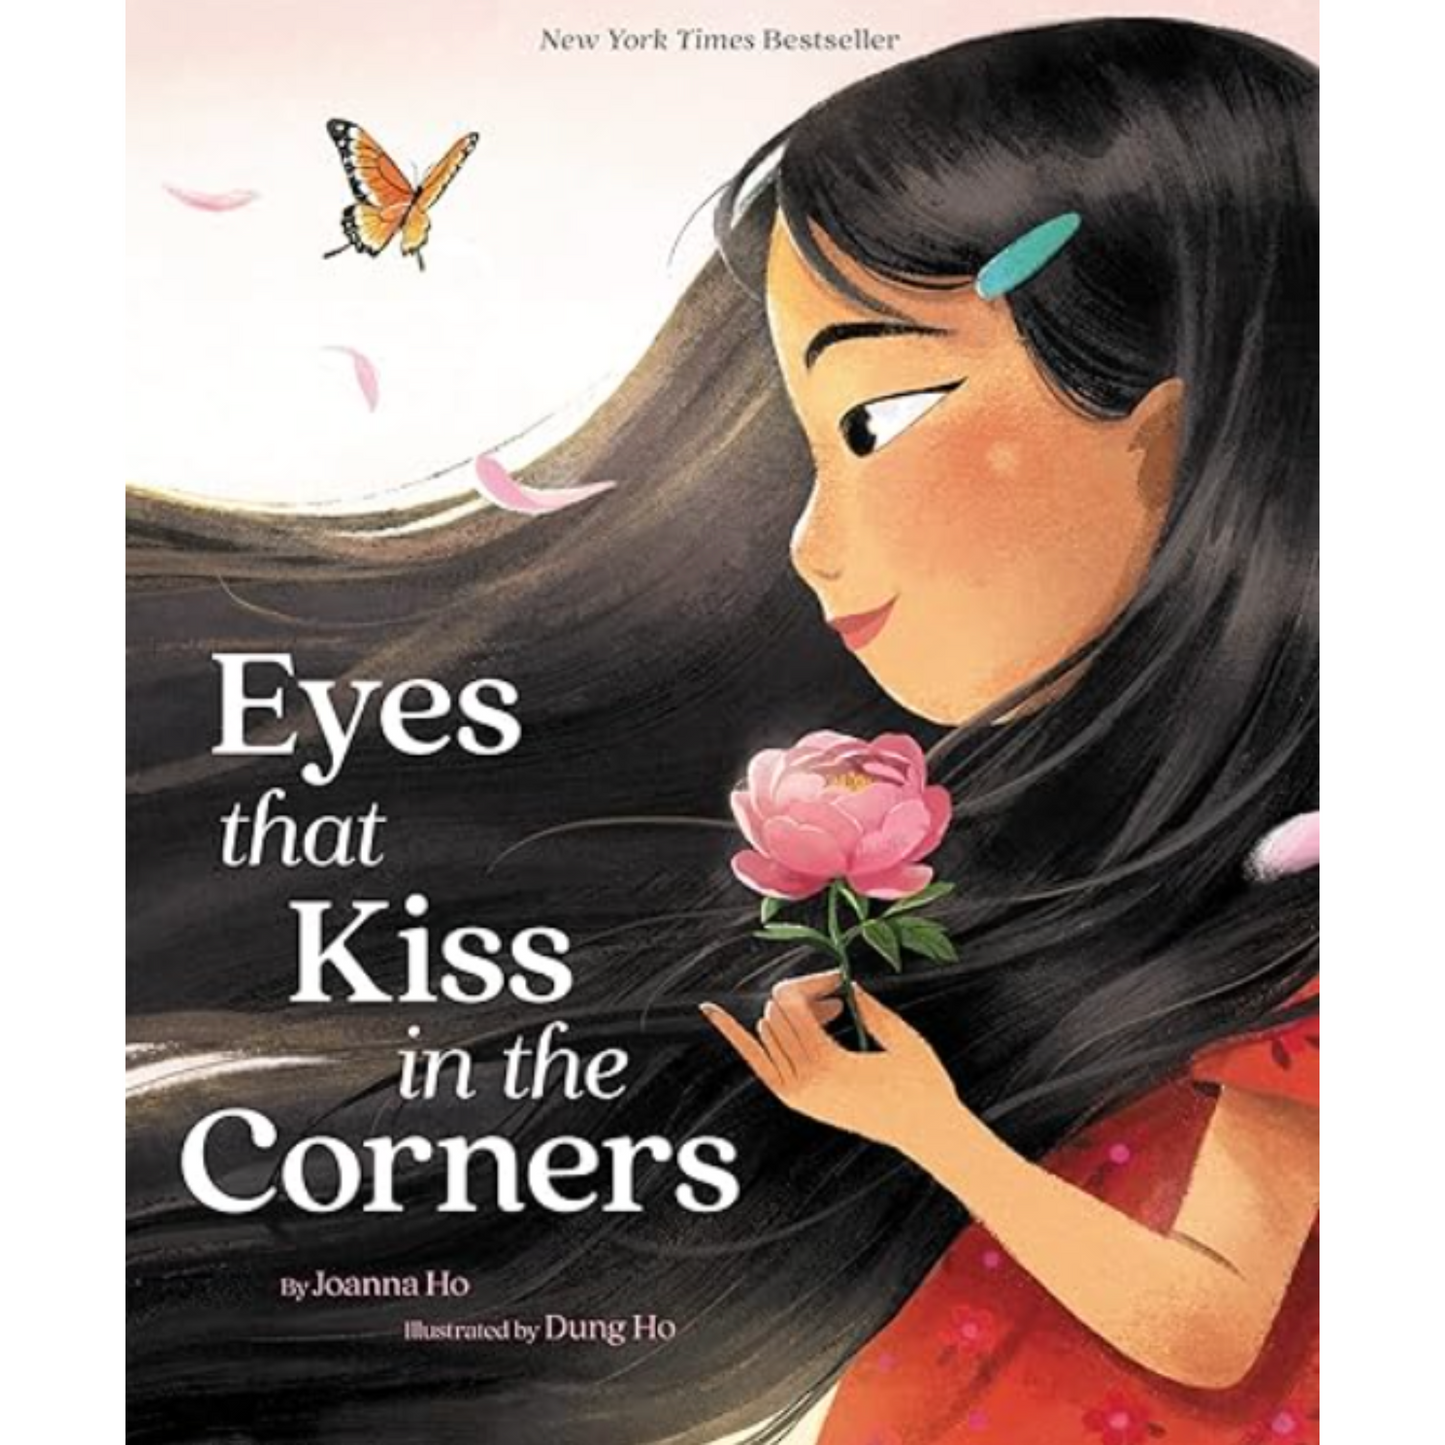 Eyes That Kiss in the Corners Hardcover Ð Picture Book, January 5, 2021 by Joanna Ho (Author), Dung Ho (Illustrator) paperback